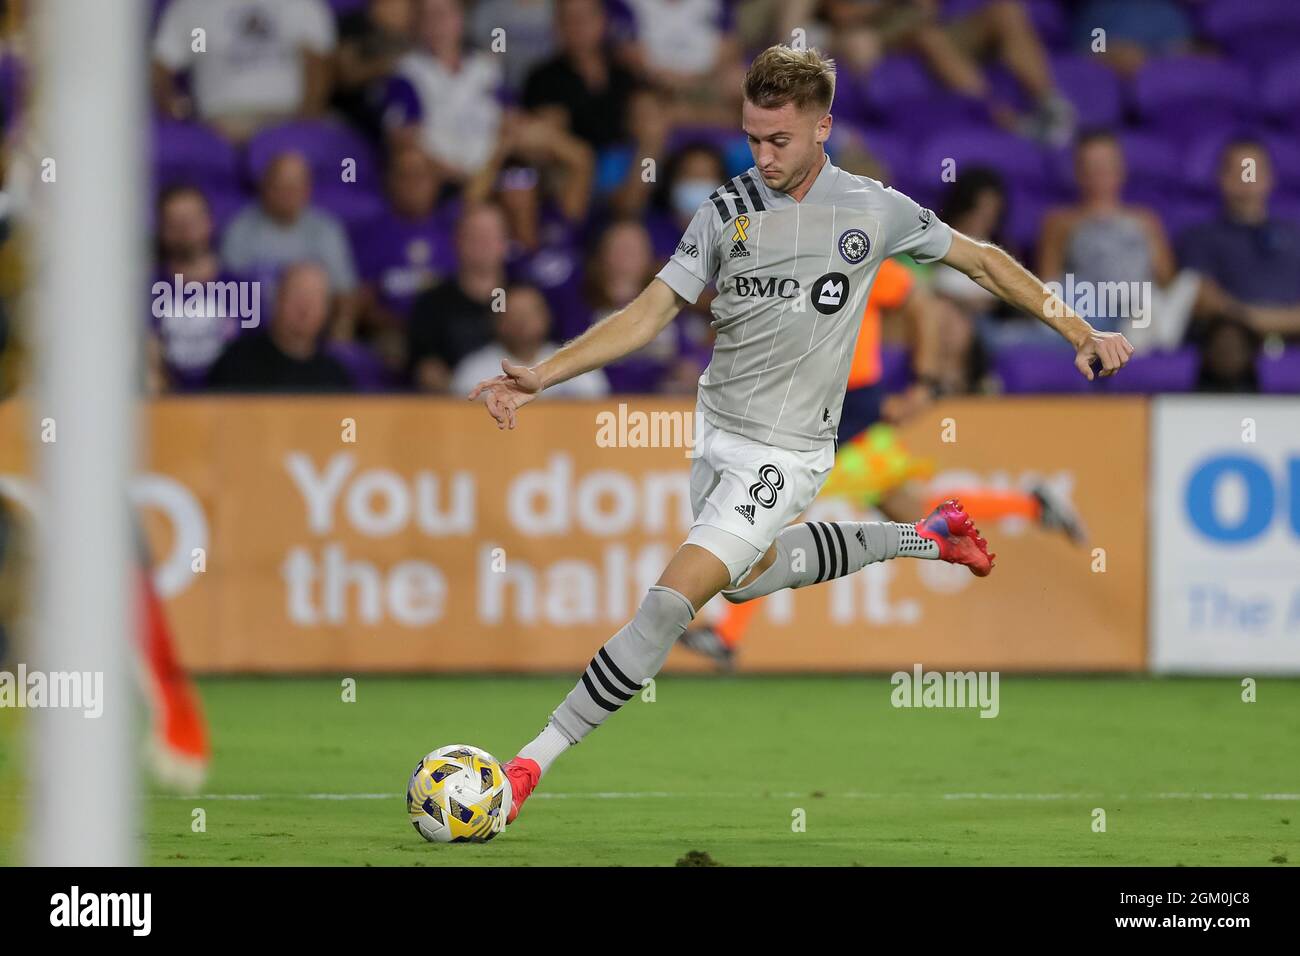 September 15, 2021: CF Montréal midfielder DJORDJE MIHAILOVIC (8) takes a shot on goal during the first half of the Orlando City vs CF Montreal soccer match at Exploria Stadium in Orlando, FL on September 15, 2021. (Credit Image: © Cory Knowlton/ZUMA Press Wire) Stock Photo